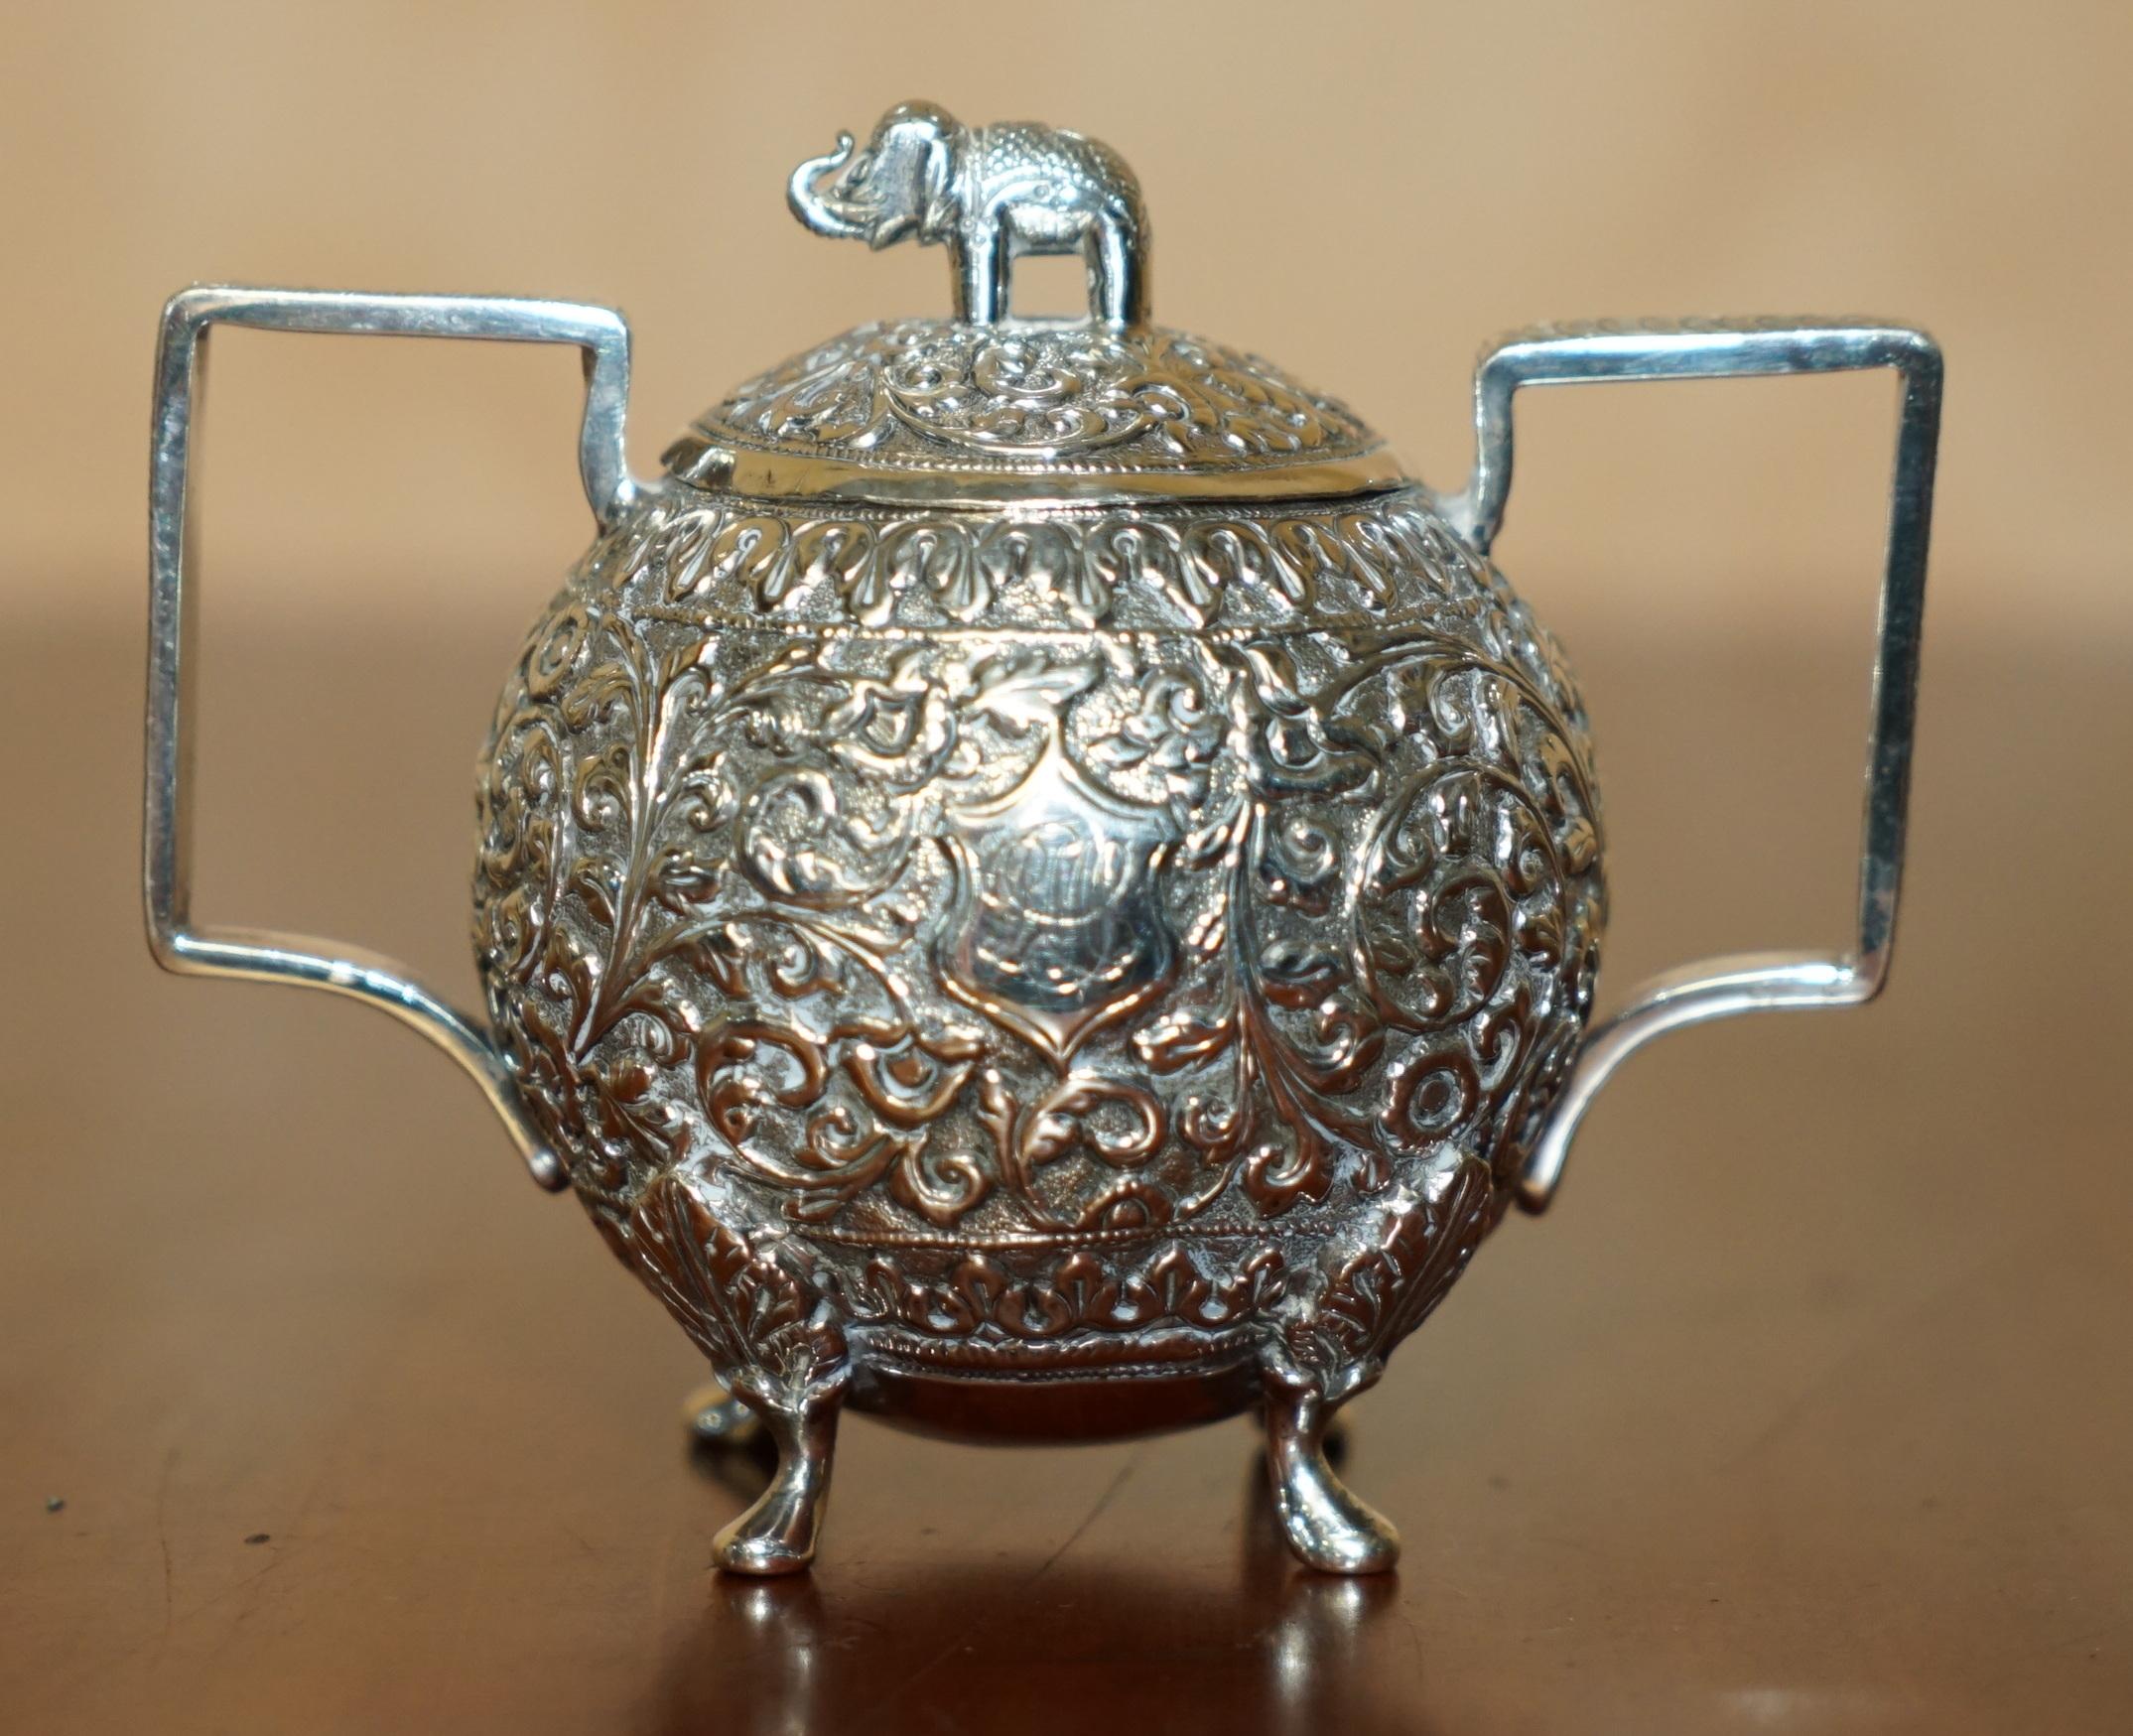 ANTIQUE INDIAN ELEPHANT COLONIAL SOLiD SILVER TEA SERVICE OOMERSI MAWJI & SONS For Sale 4